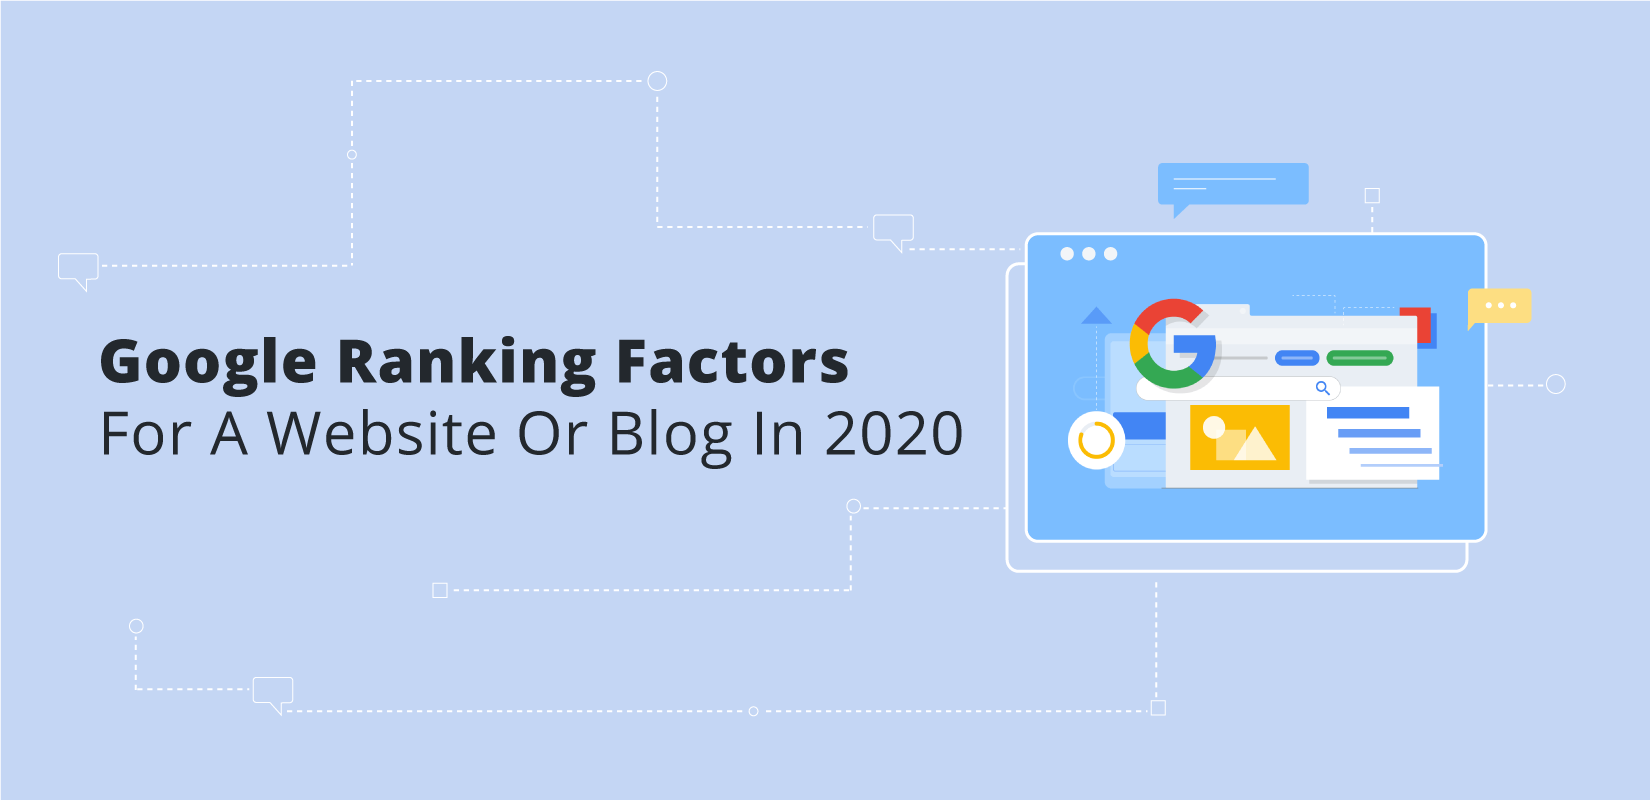 Google Ranking Factors For A Website Or Blog In 2020